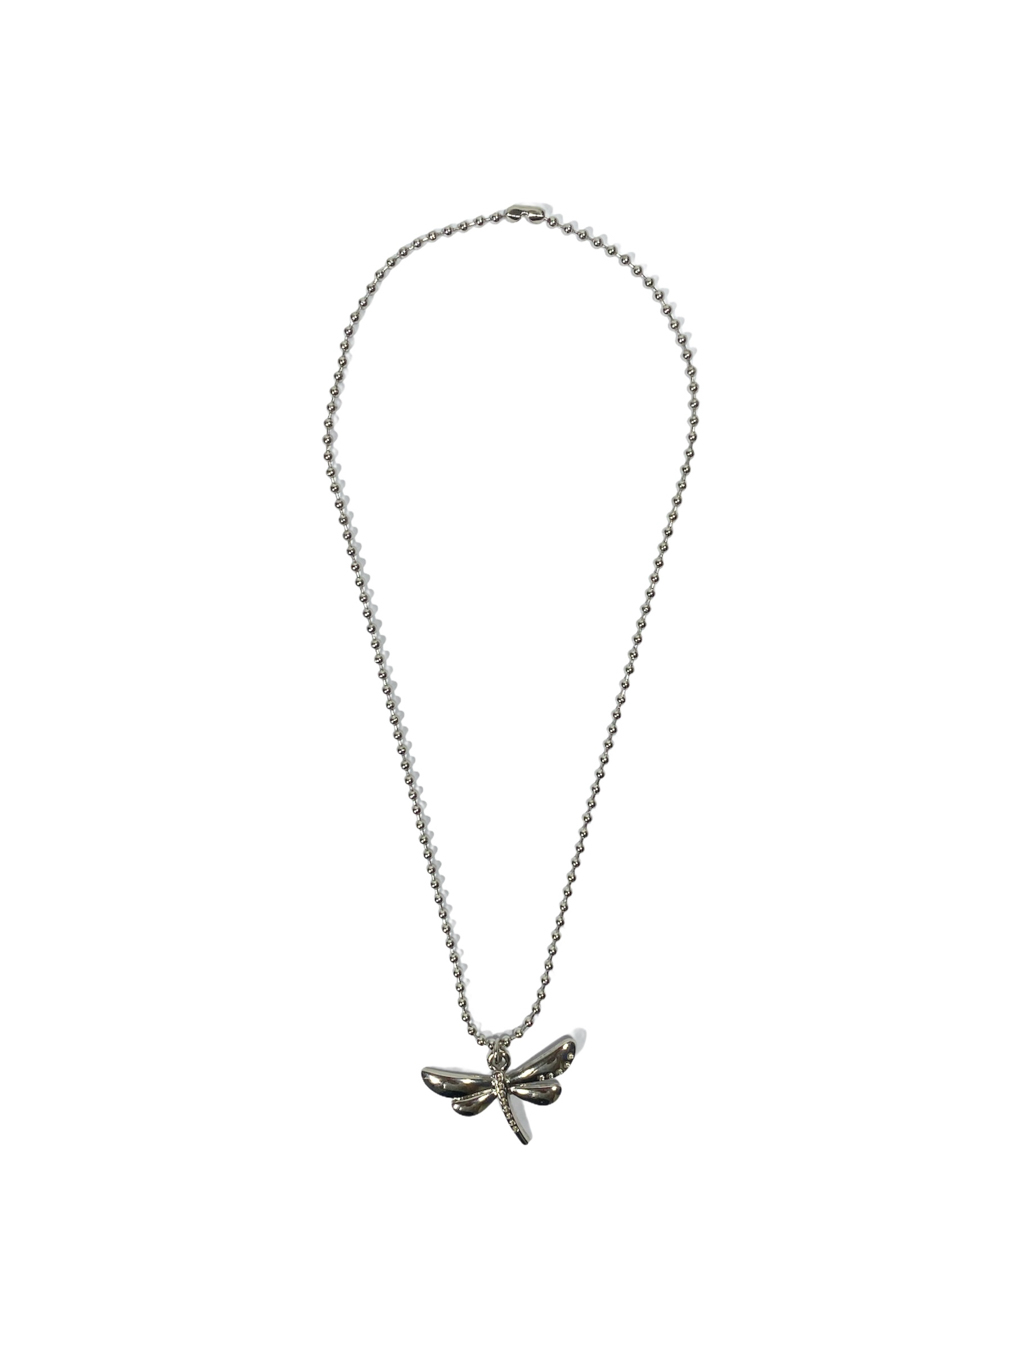 Necklace (Dragonfly)